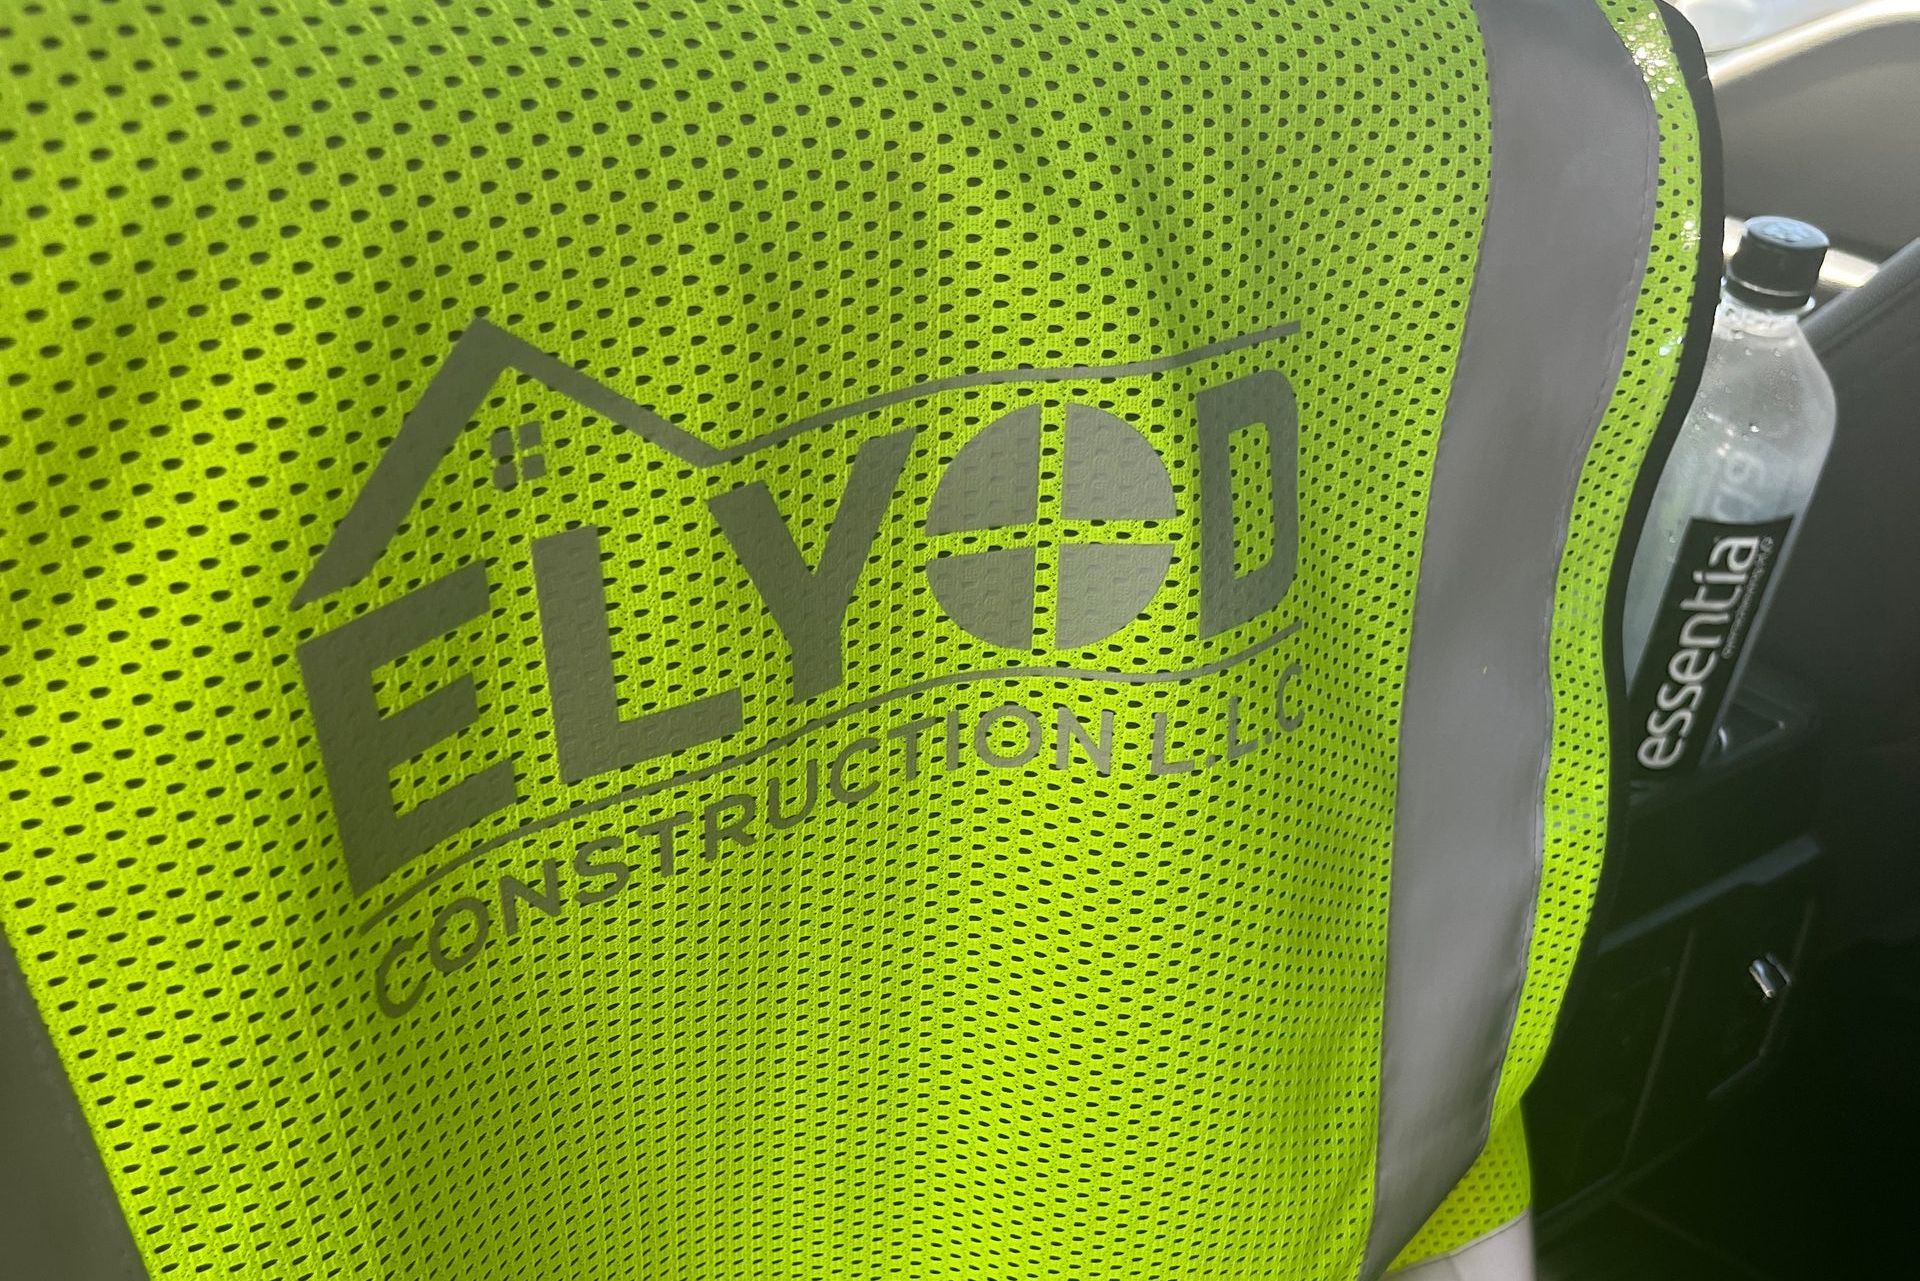 Elyod Construction business logo on yellow work vest 